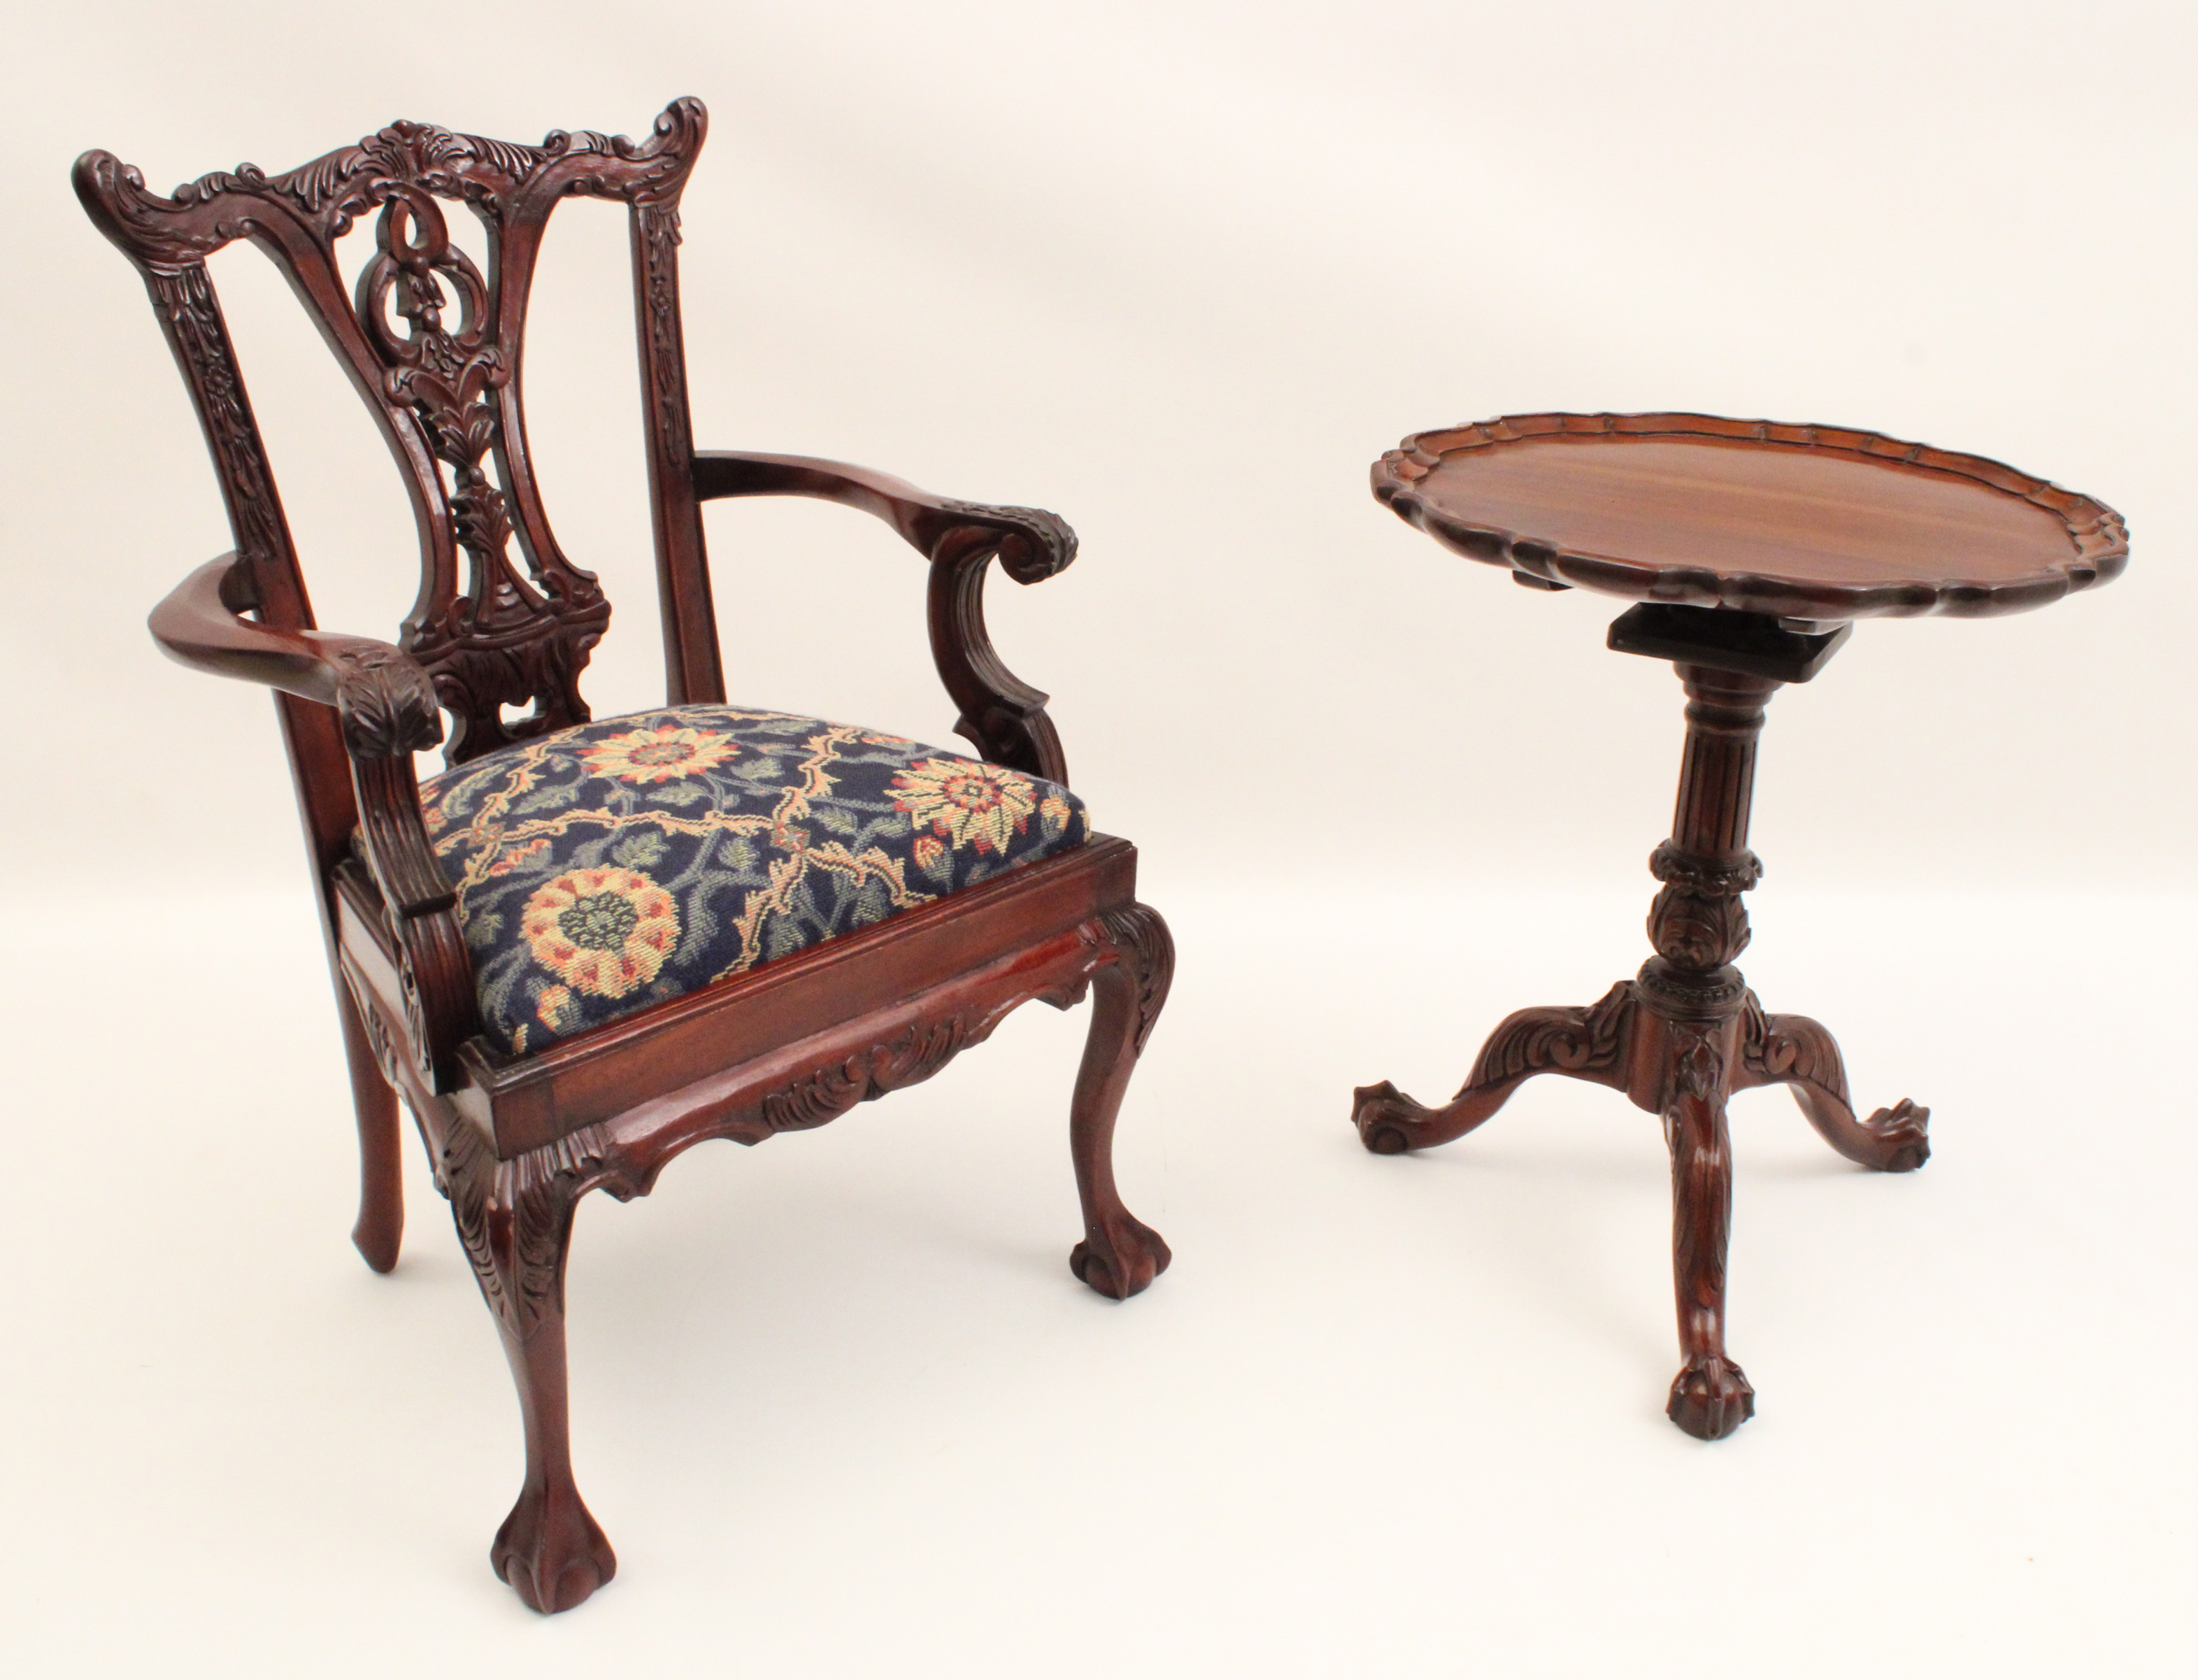 GROUP OF 2 PCS OF MINIATURE FURNITURE